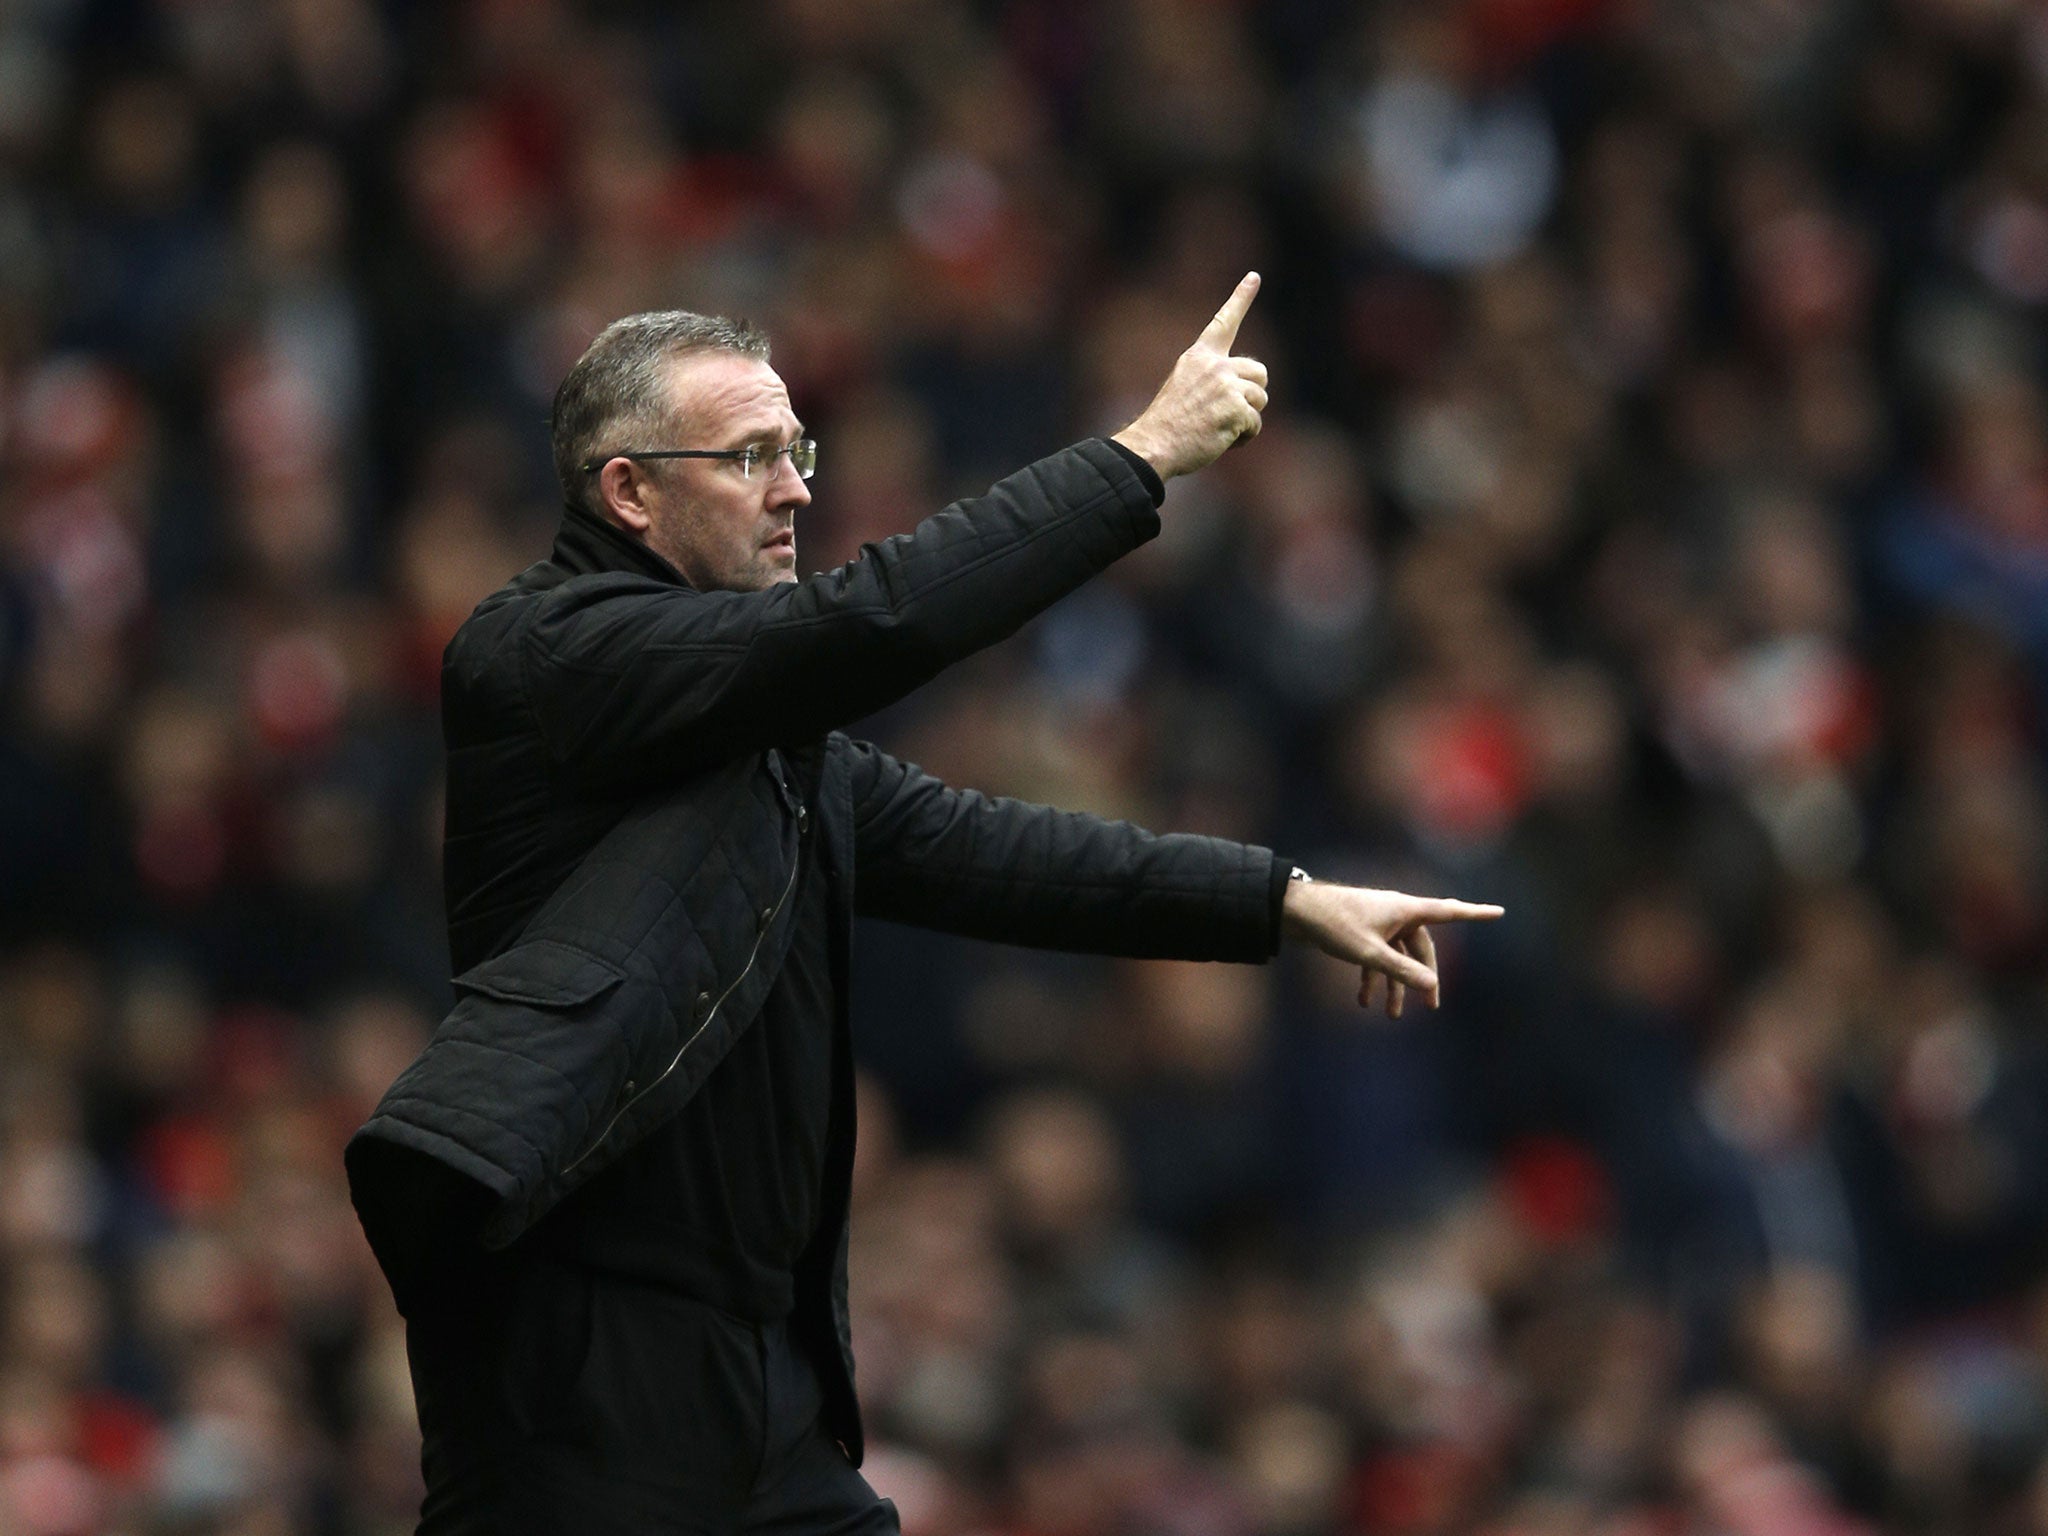 Paul Lambert and Wolves are pulling in different directions